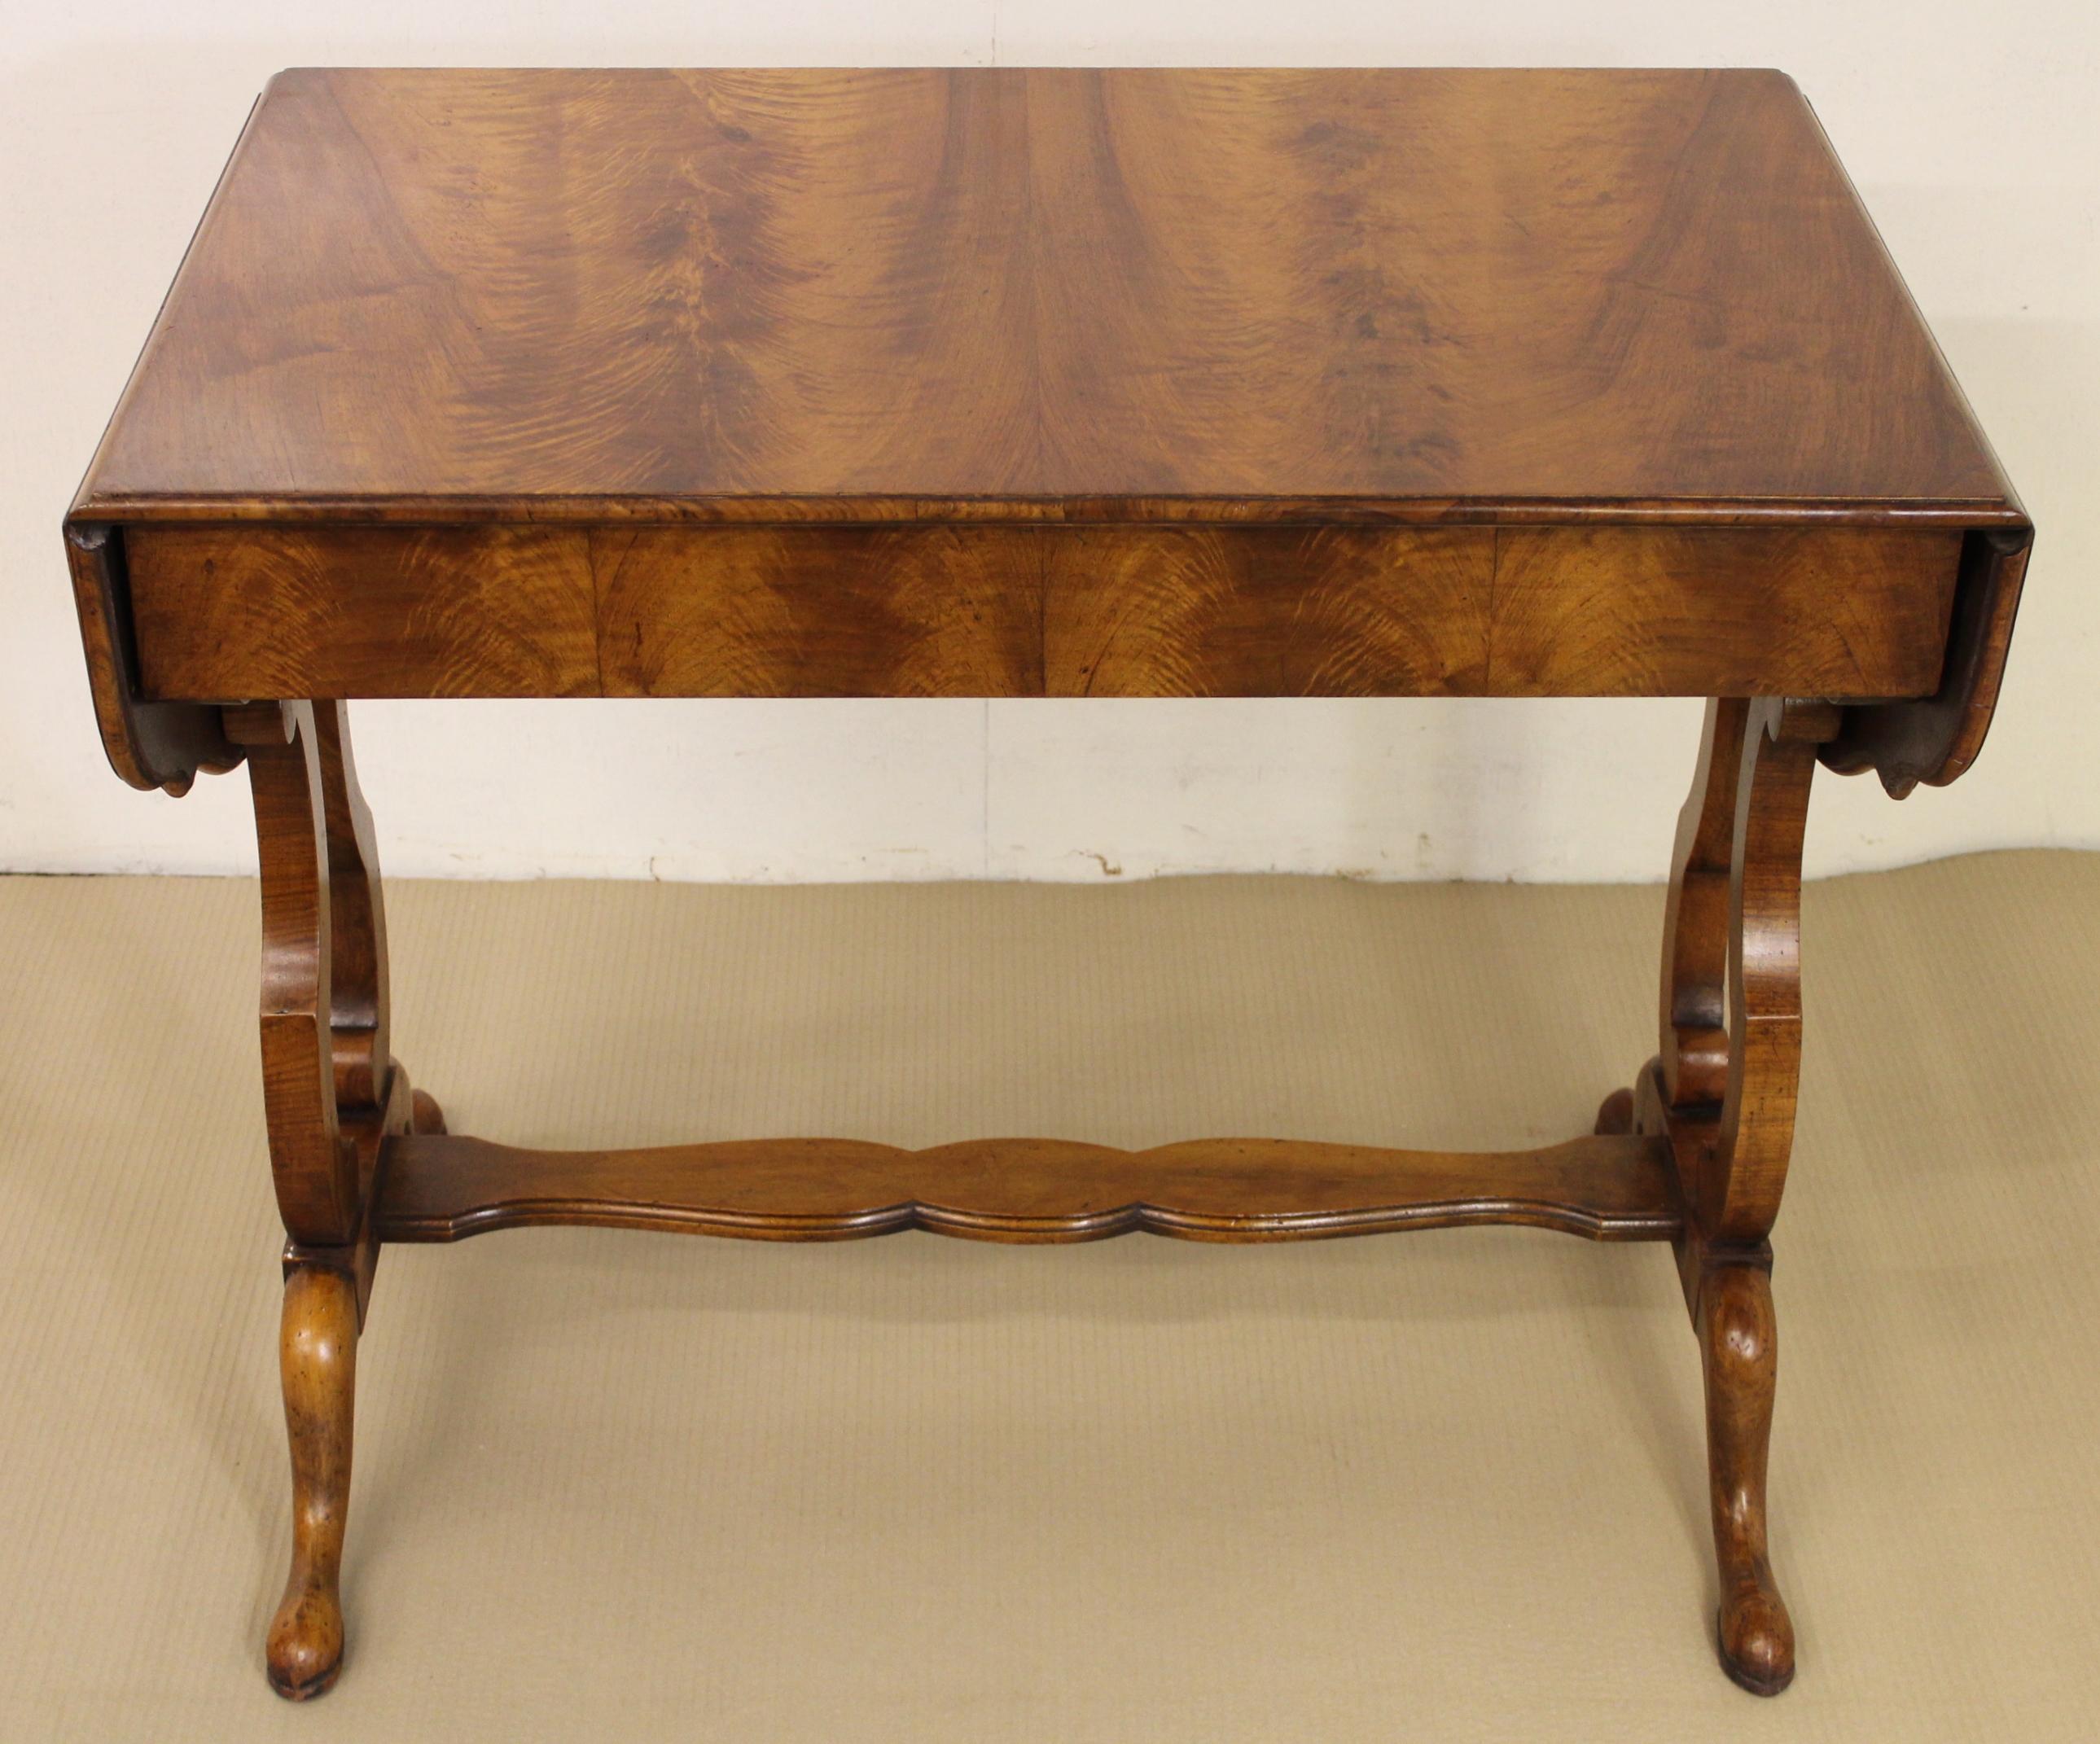 A very good Georgian style burr walnut sofa table. Of good construction in solid walnut with burr walnut veneers. We have had this table sympathetically repolished to a very high standard, it has a wonderful warm color and patina. The single, long,